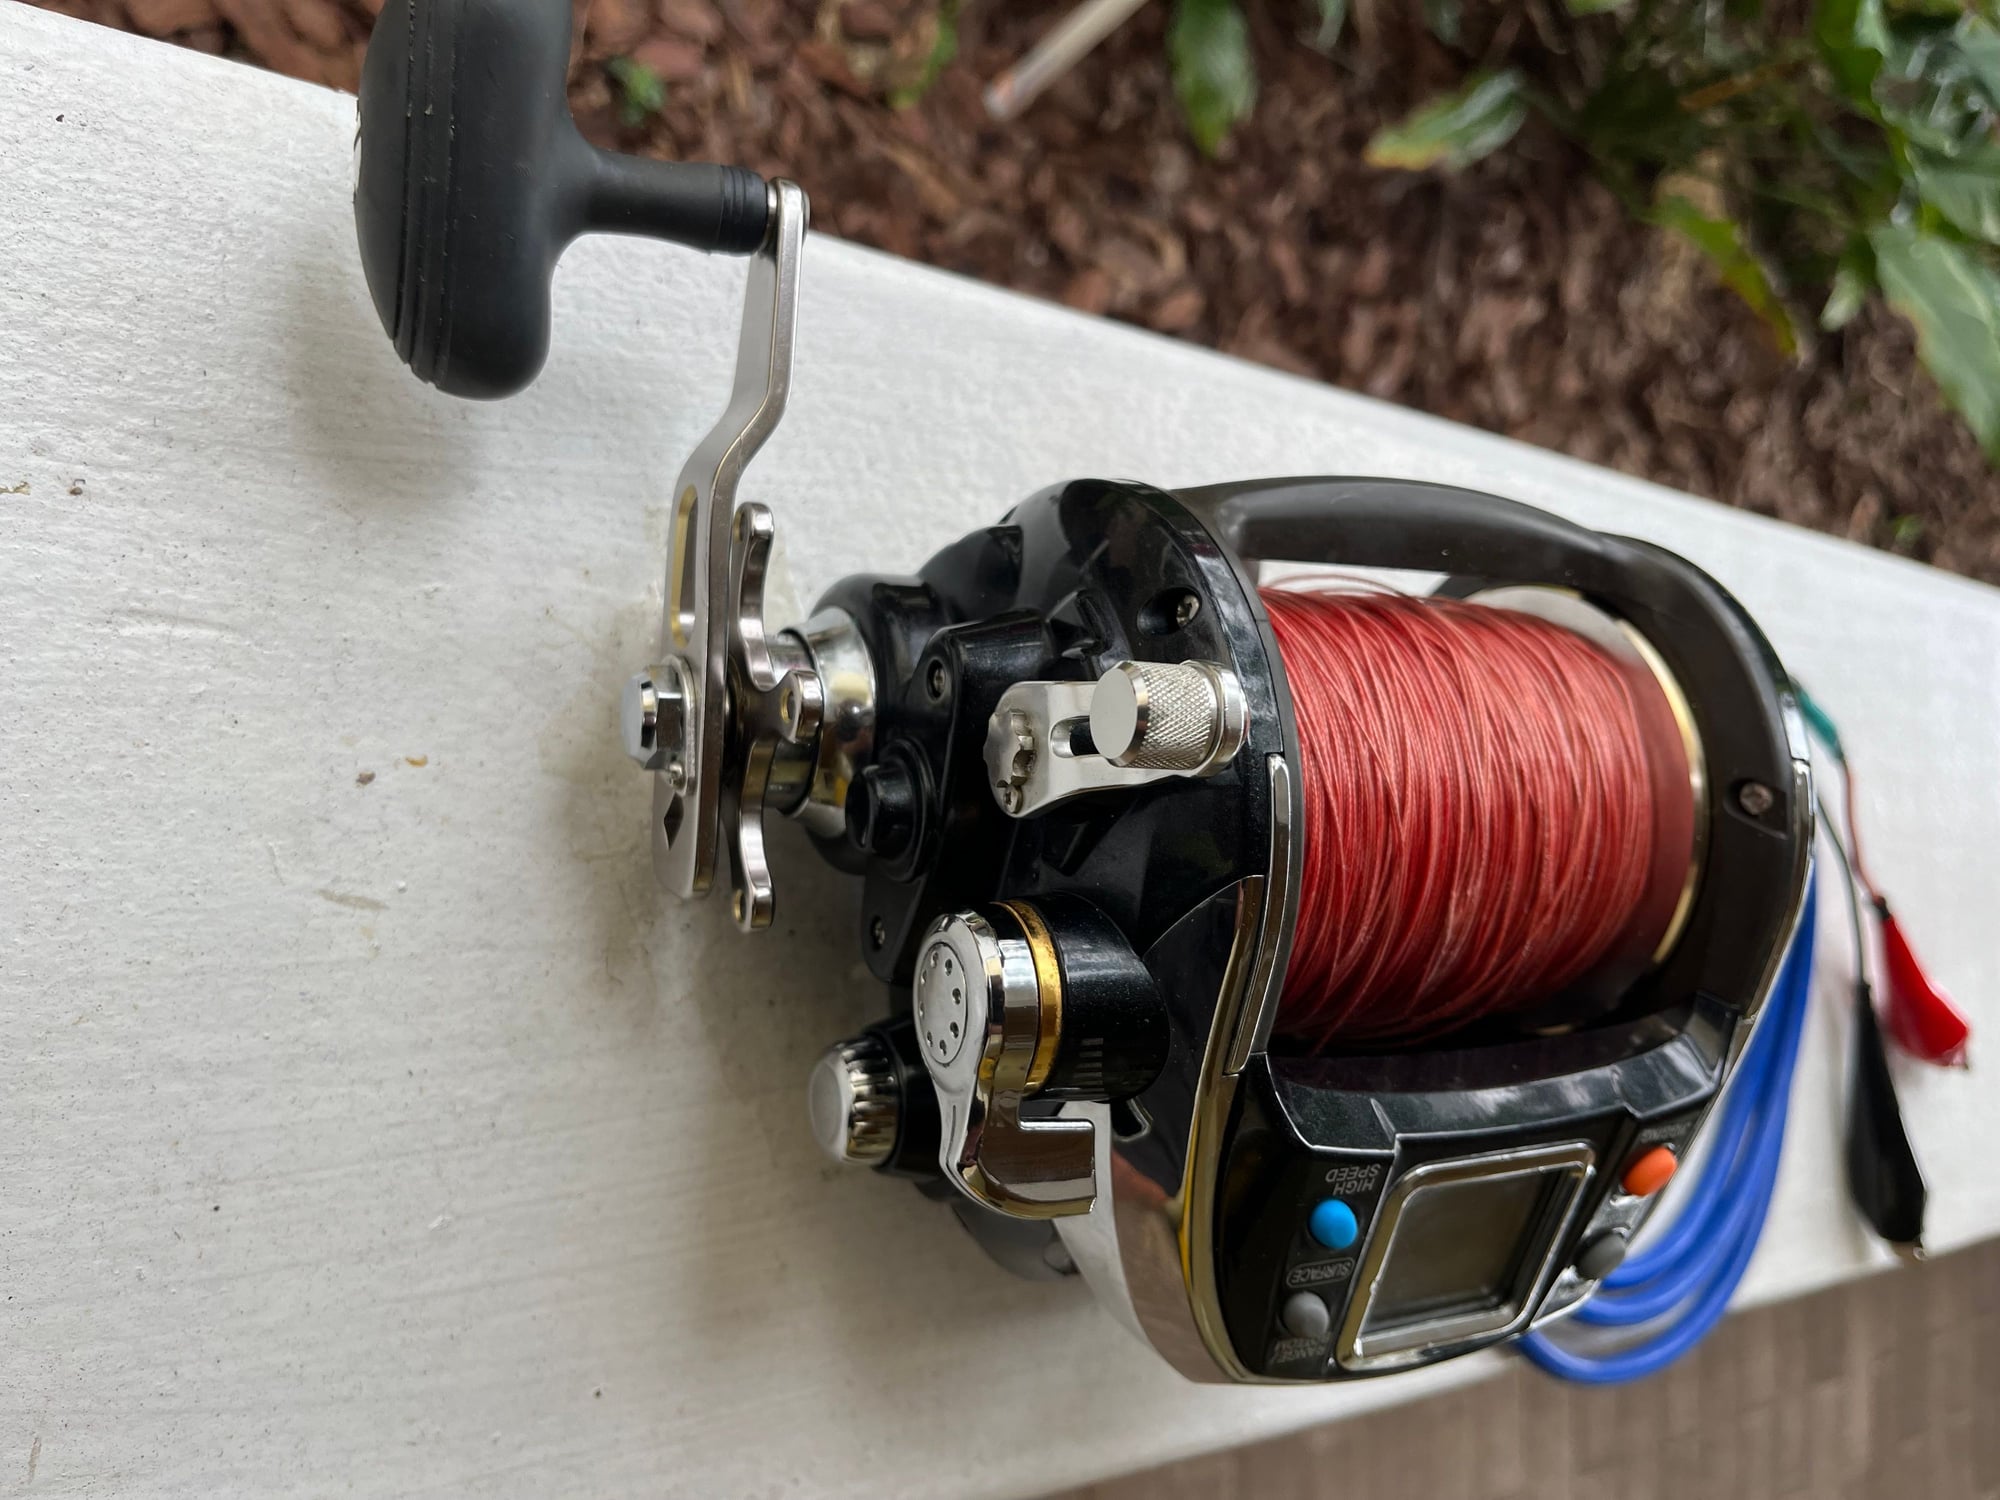 Banax Kaigen 1000 electric reel - The Hull Truth - Boating and Fishing Forum